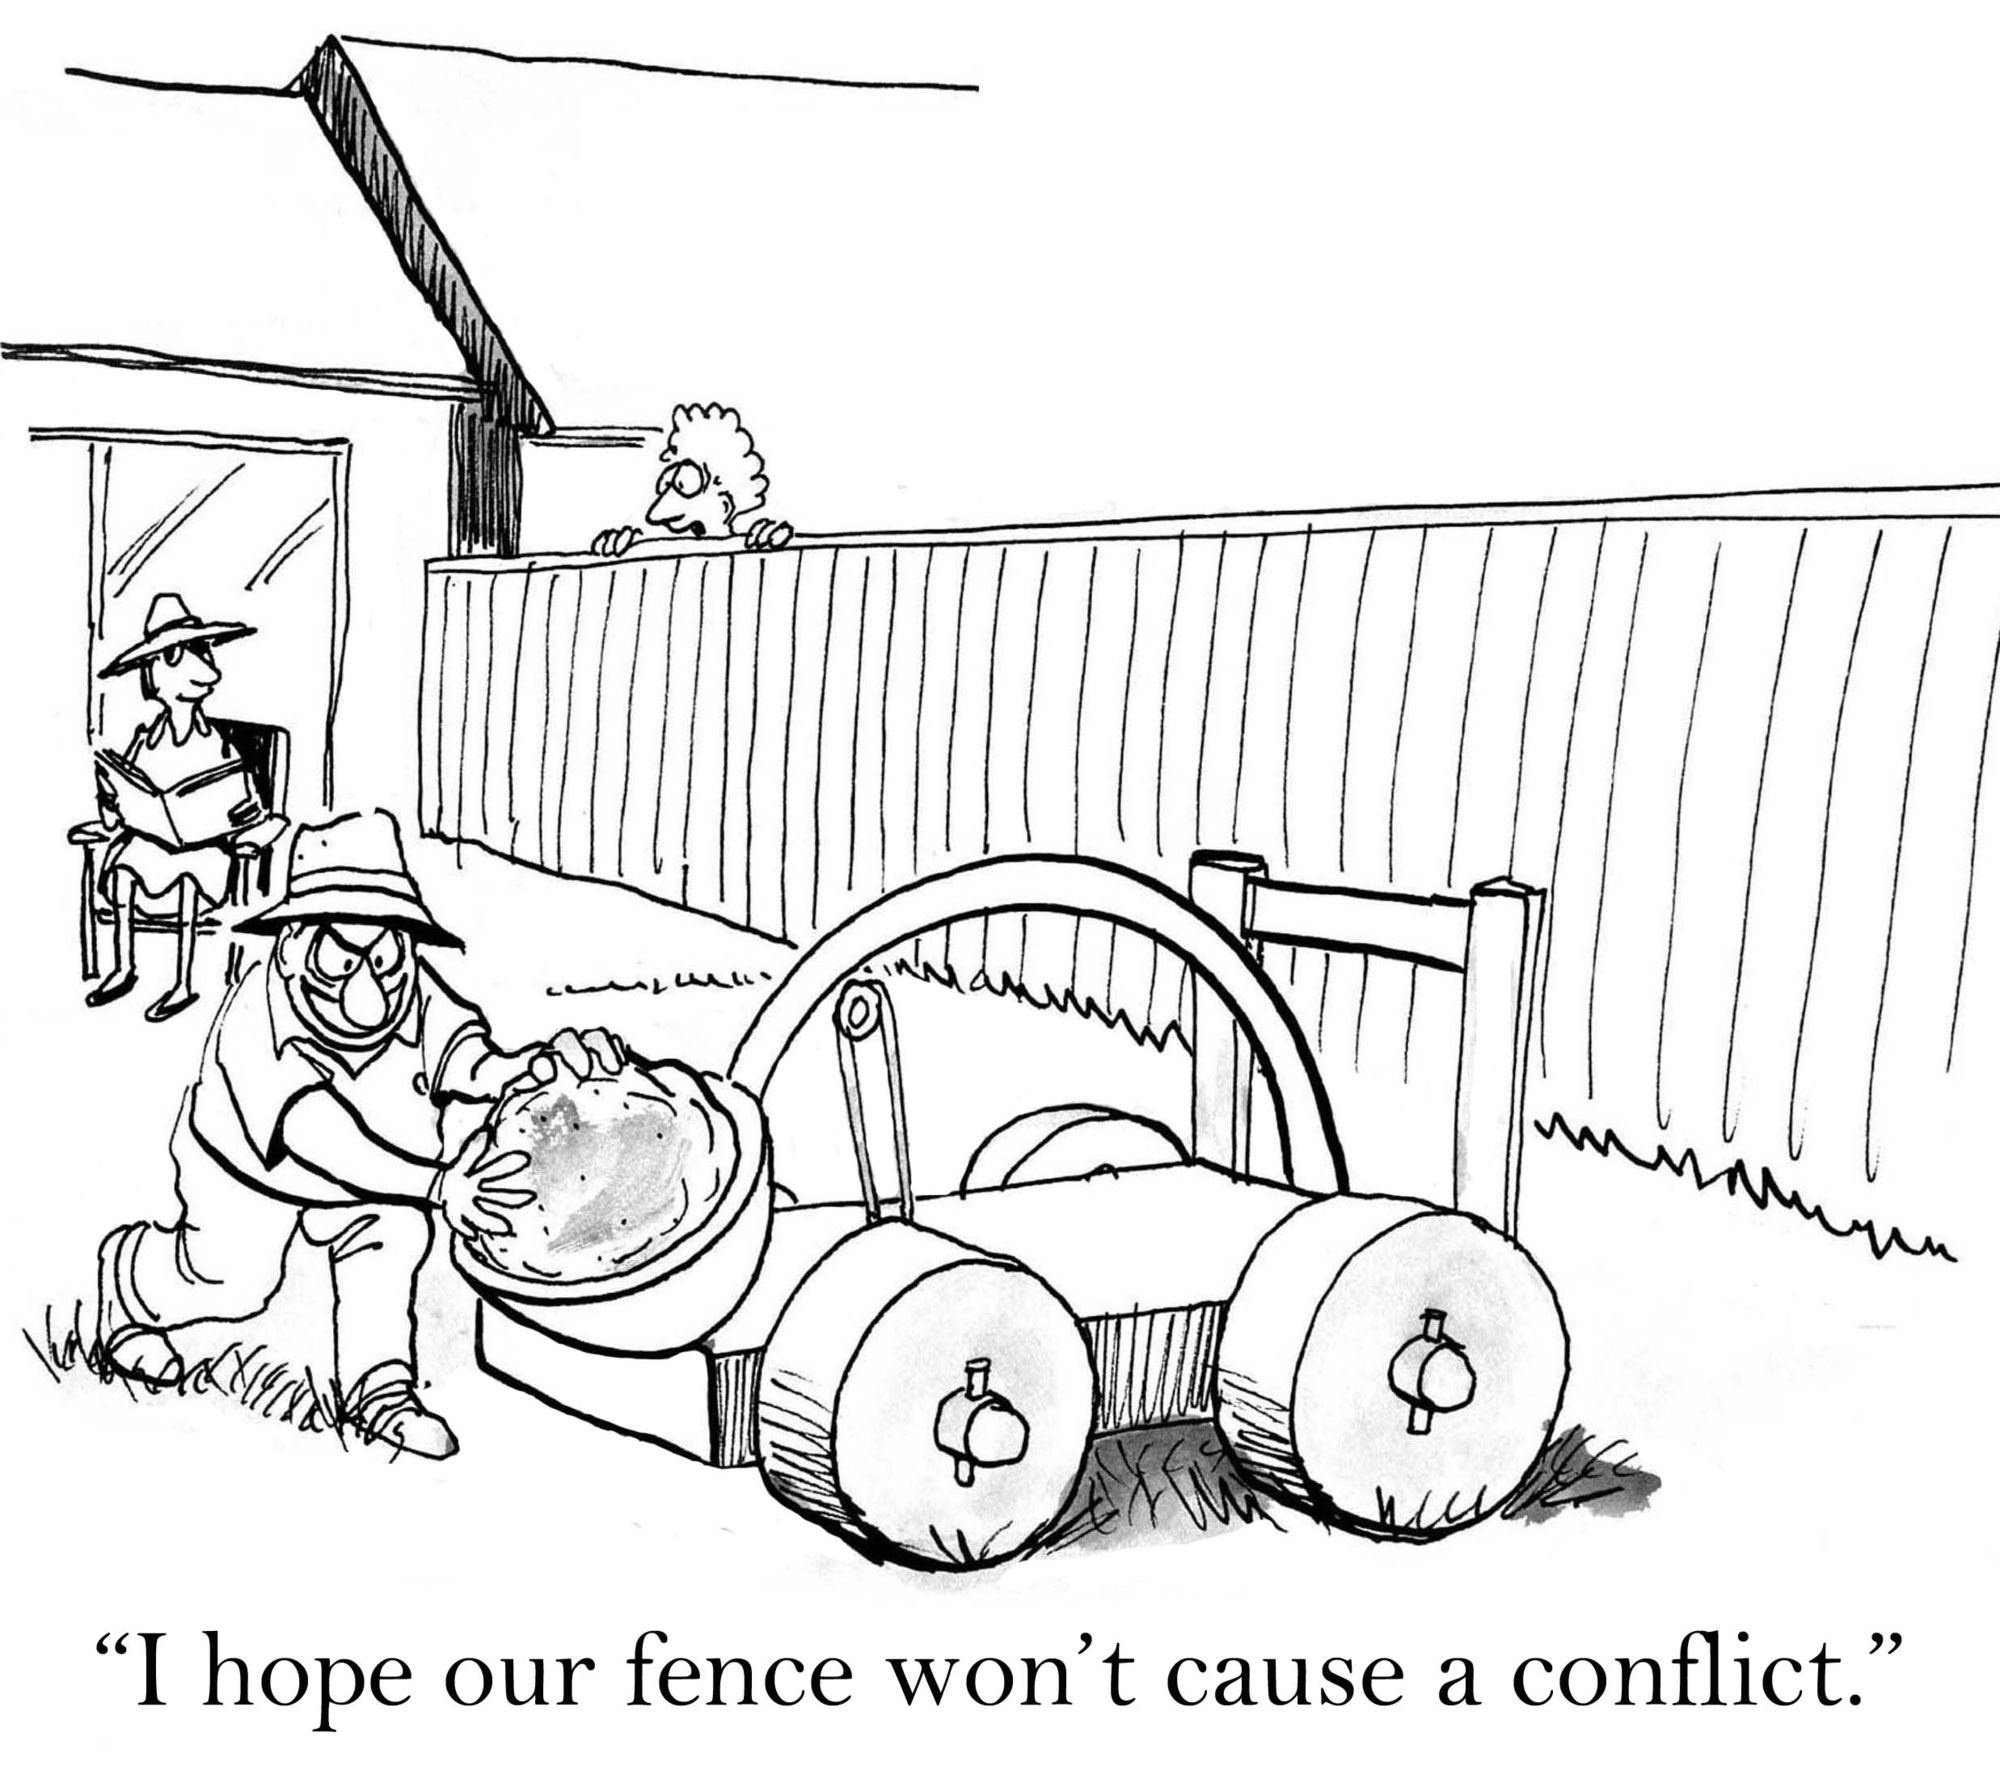 I hope our fence does not offend